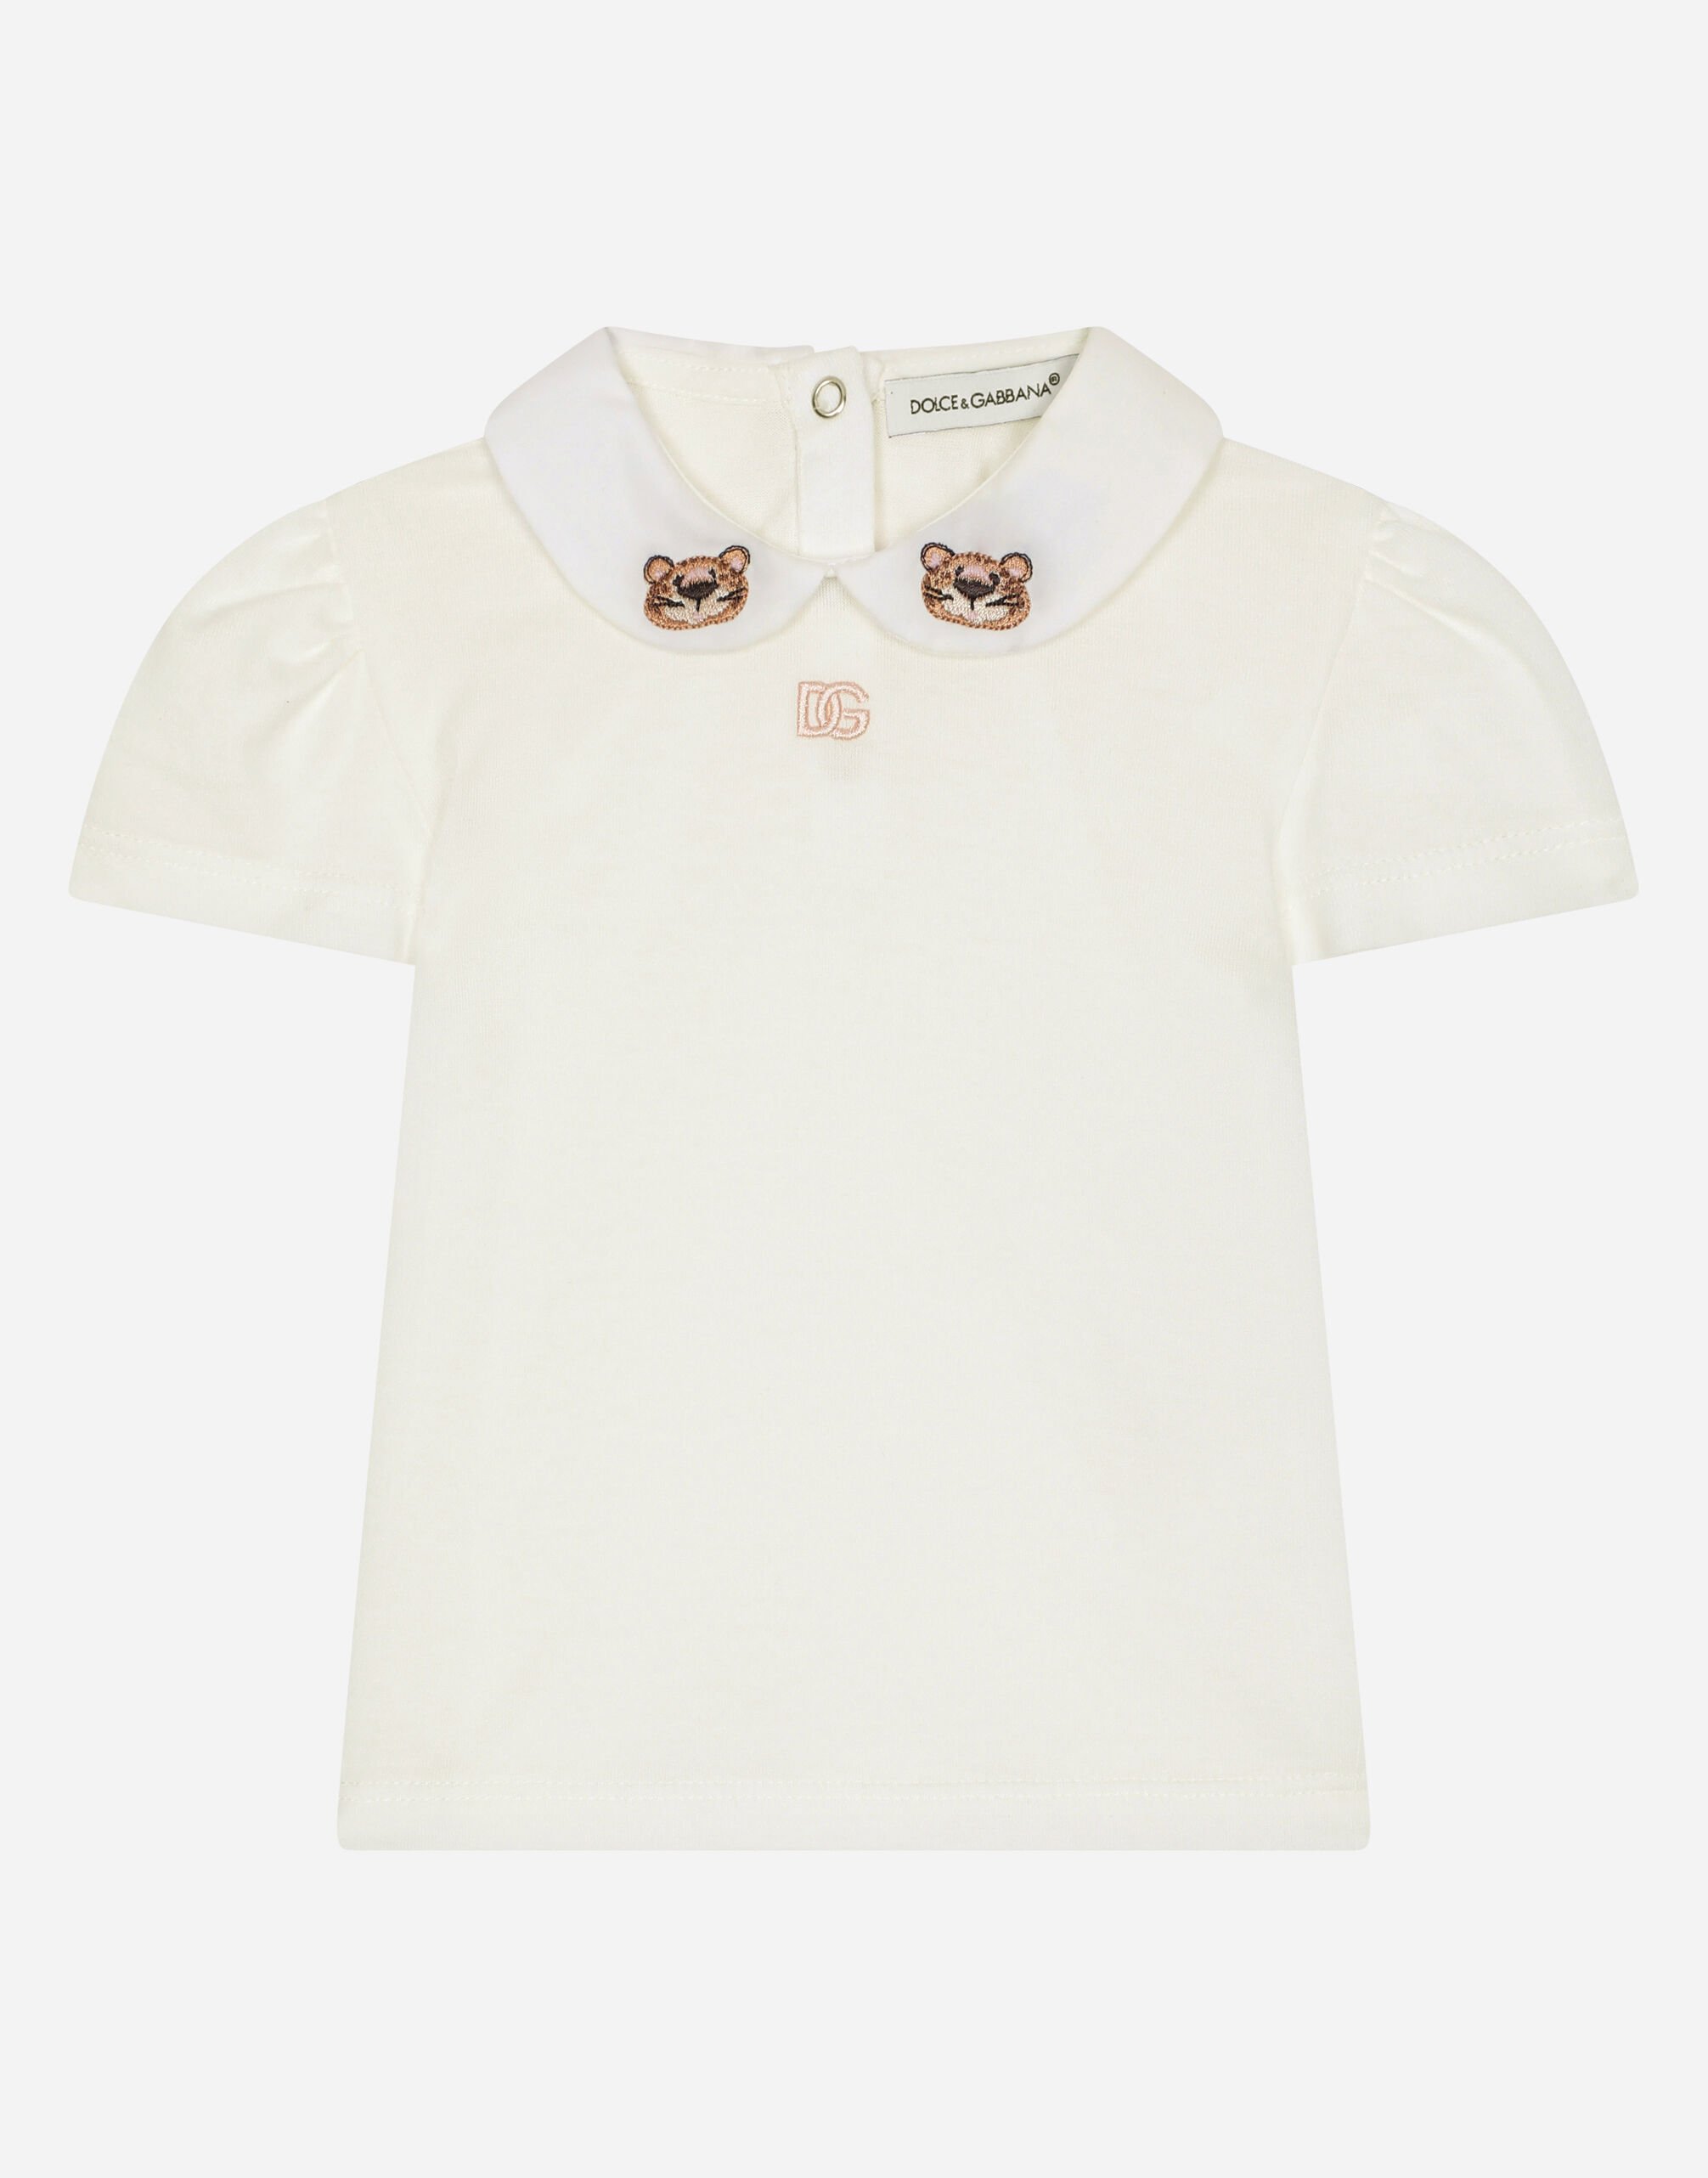 Dolce & Gabbana Jersey T-shirt with baby leopard embroidery Beige L1KWF6JAWX7